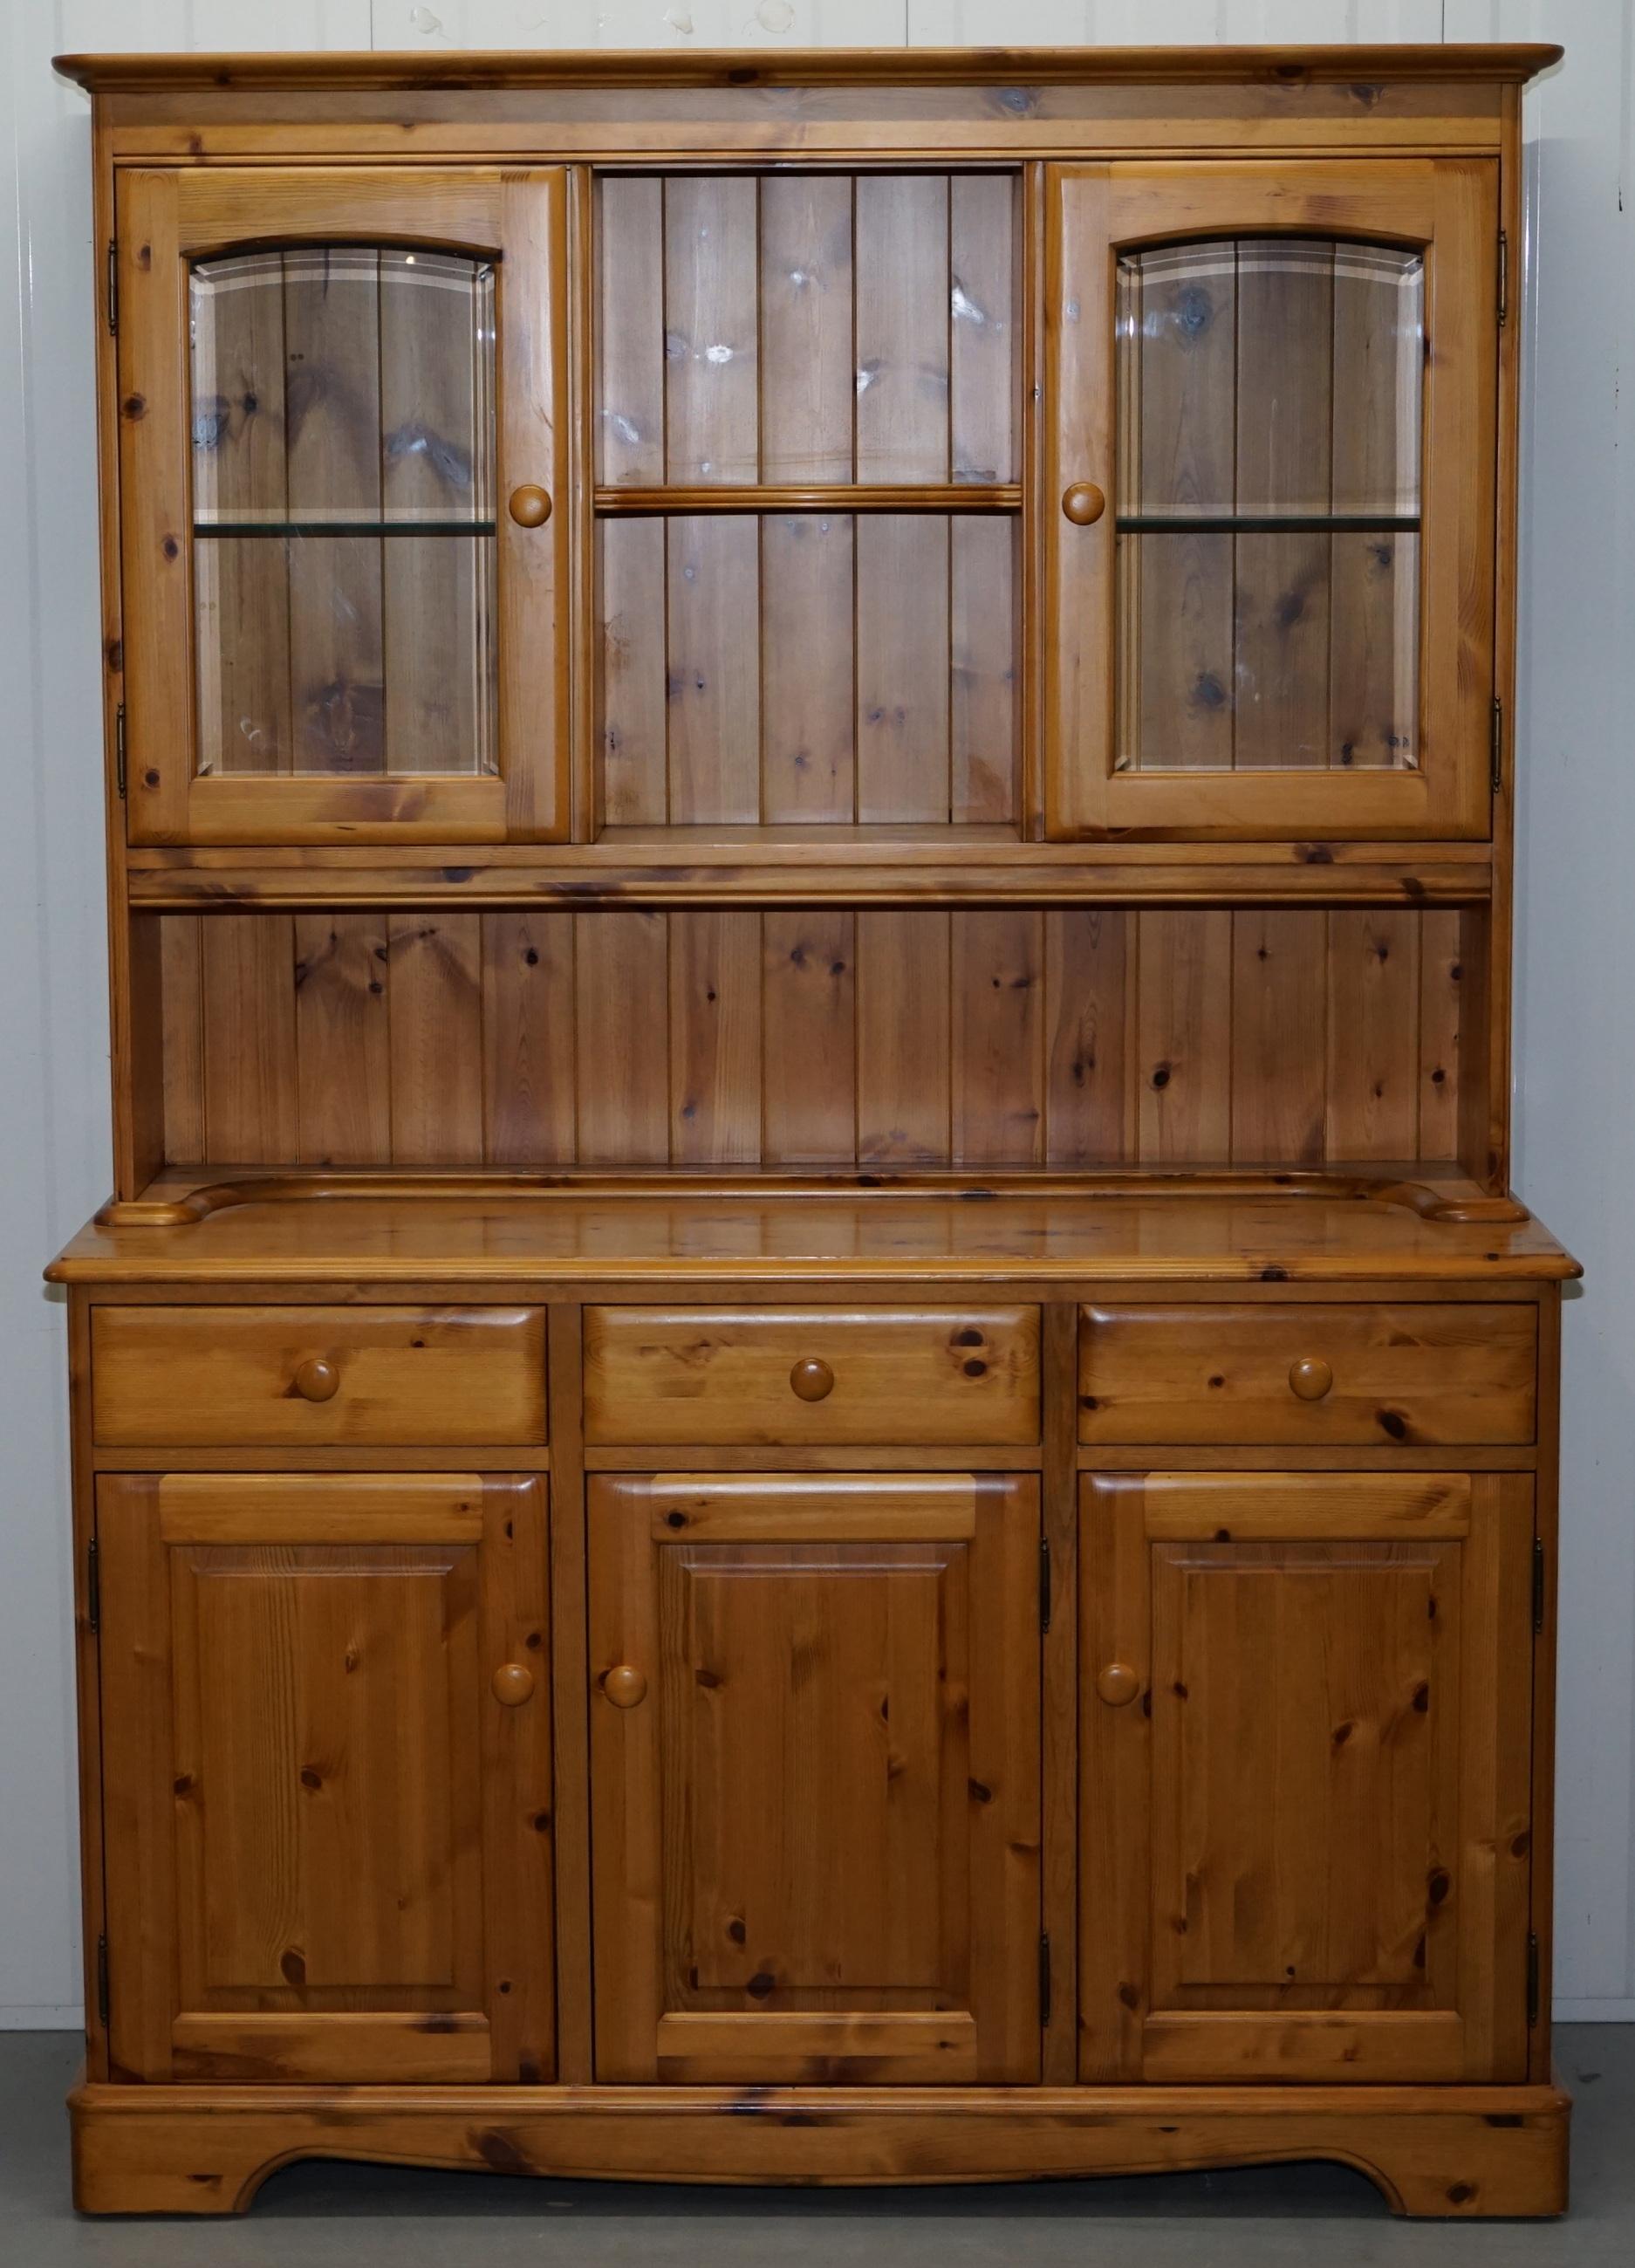 We are delighted to offer for sale this lovely triple bank ducal solid English pine ducal welsh dresser display cabinet

This dresser comes with glass shelves and spotlights although I don’t have the adaptor for this one to plug it in

Its a